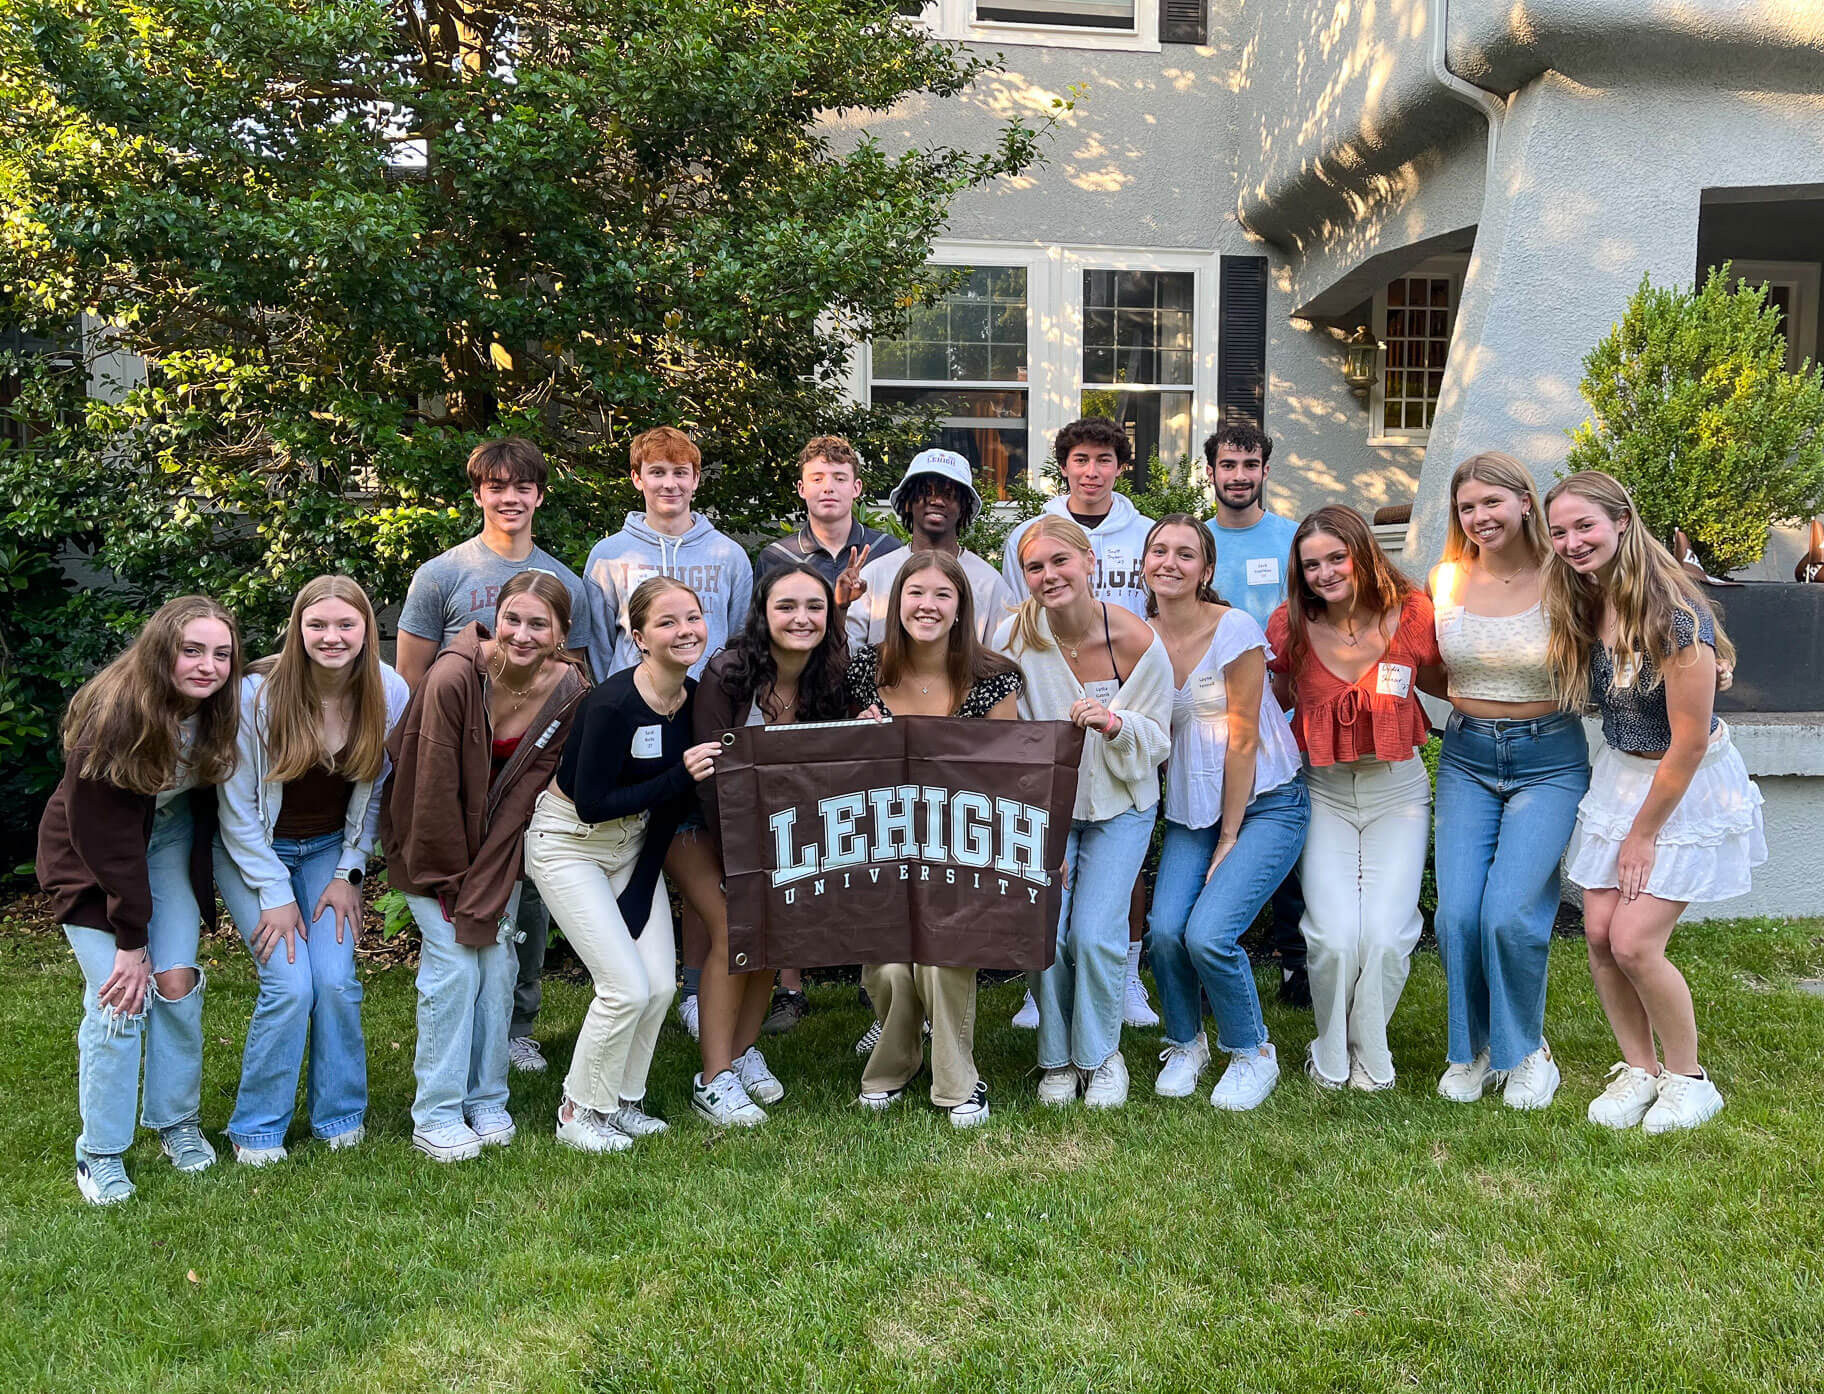 A group of Lehigh students hold a brown Lehigh flag and gather for a photo during an outdoor Sendoff event.